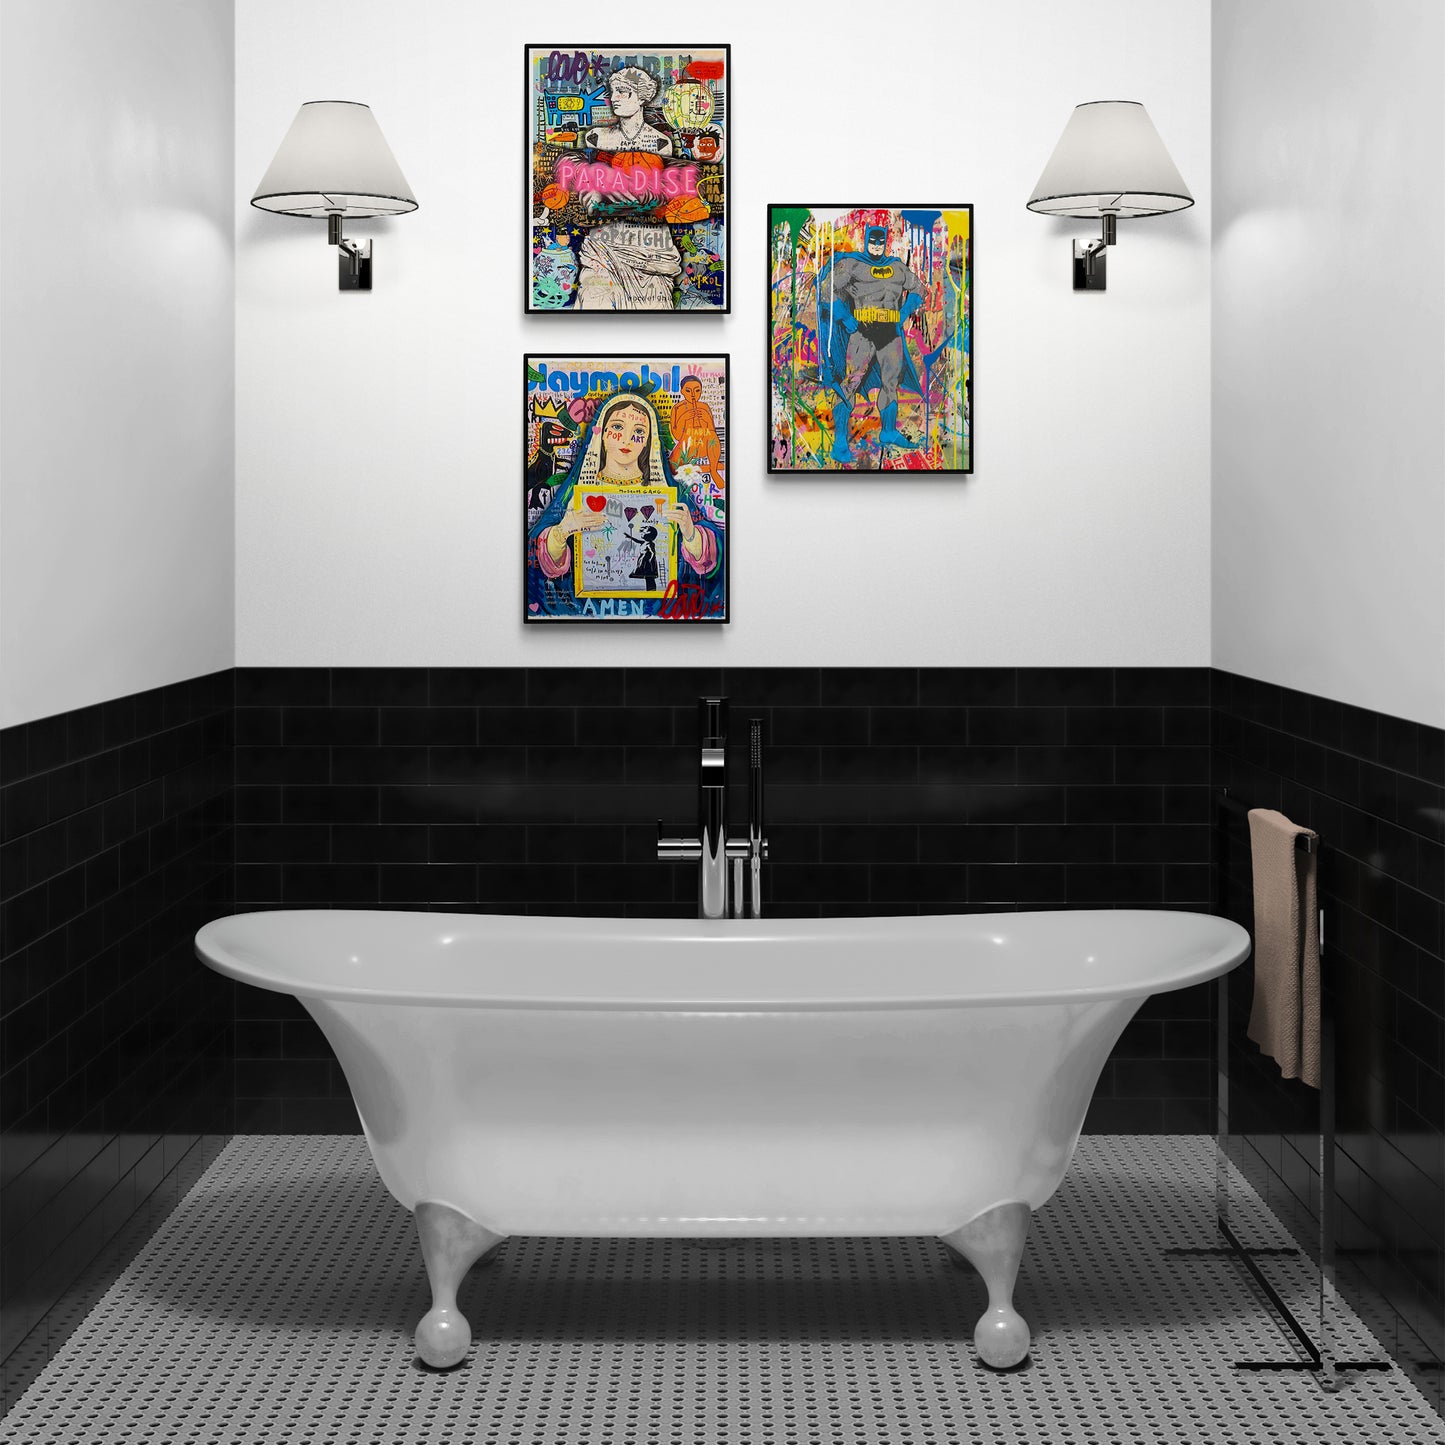 This Mr. Brainwash Batman 2019 Poster is the perfect addition to any home décor. With high-quality printing and a simple design, this wall art print will bring character to any room in the house. Its great quality paper makes it an ideal decoration for the kitchen or living room - the perfect gift for any Batman fan.